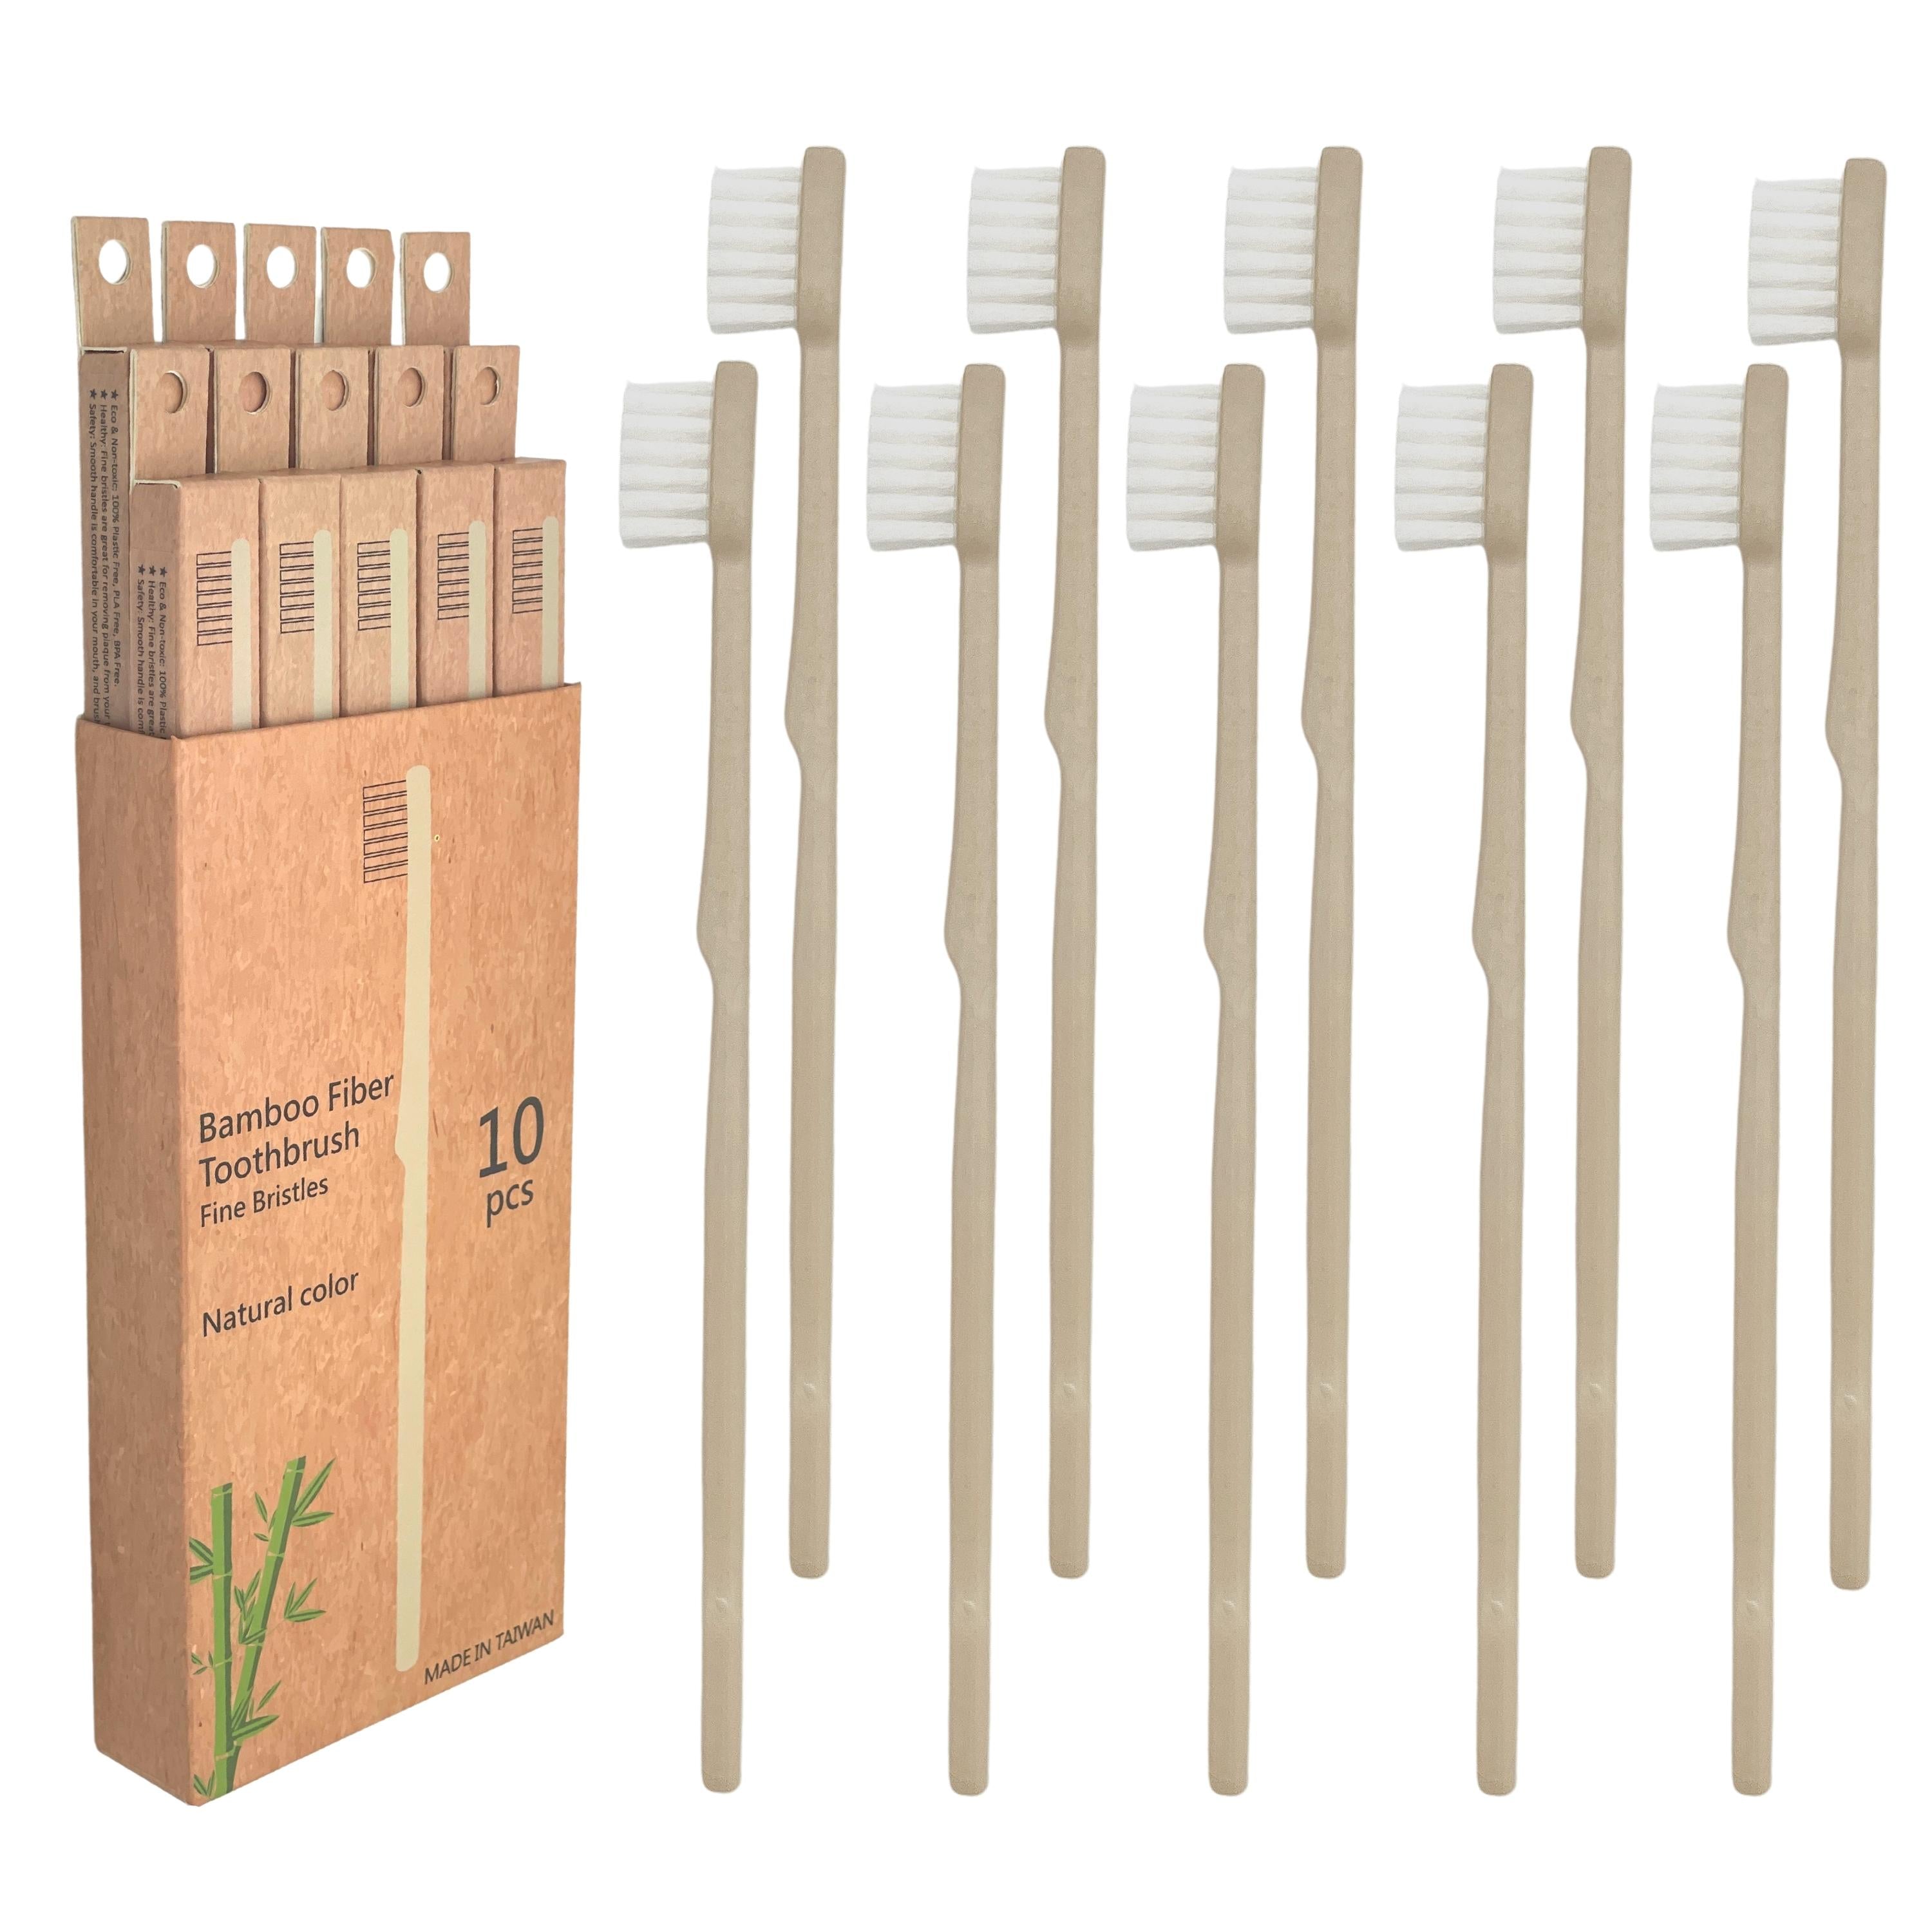 CHANYI Bamboo Toothbrushes - Medium - 100% Plant-Based Bamboo-Fiber Composite, Durable & Splinter Free, Fine BPA Free Bristles, 10 Individually Packaged Brushes - Adult